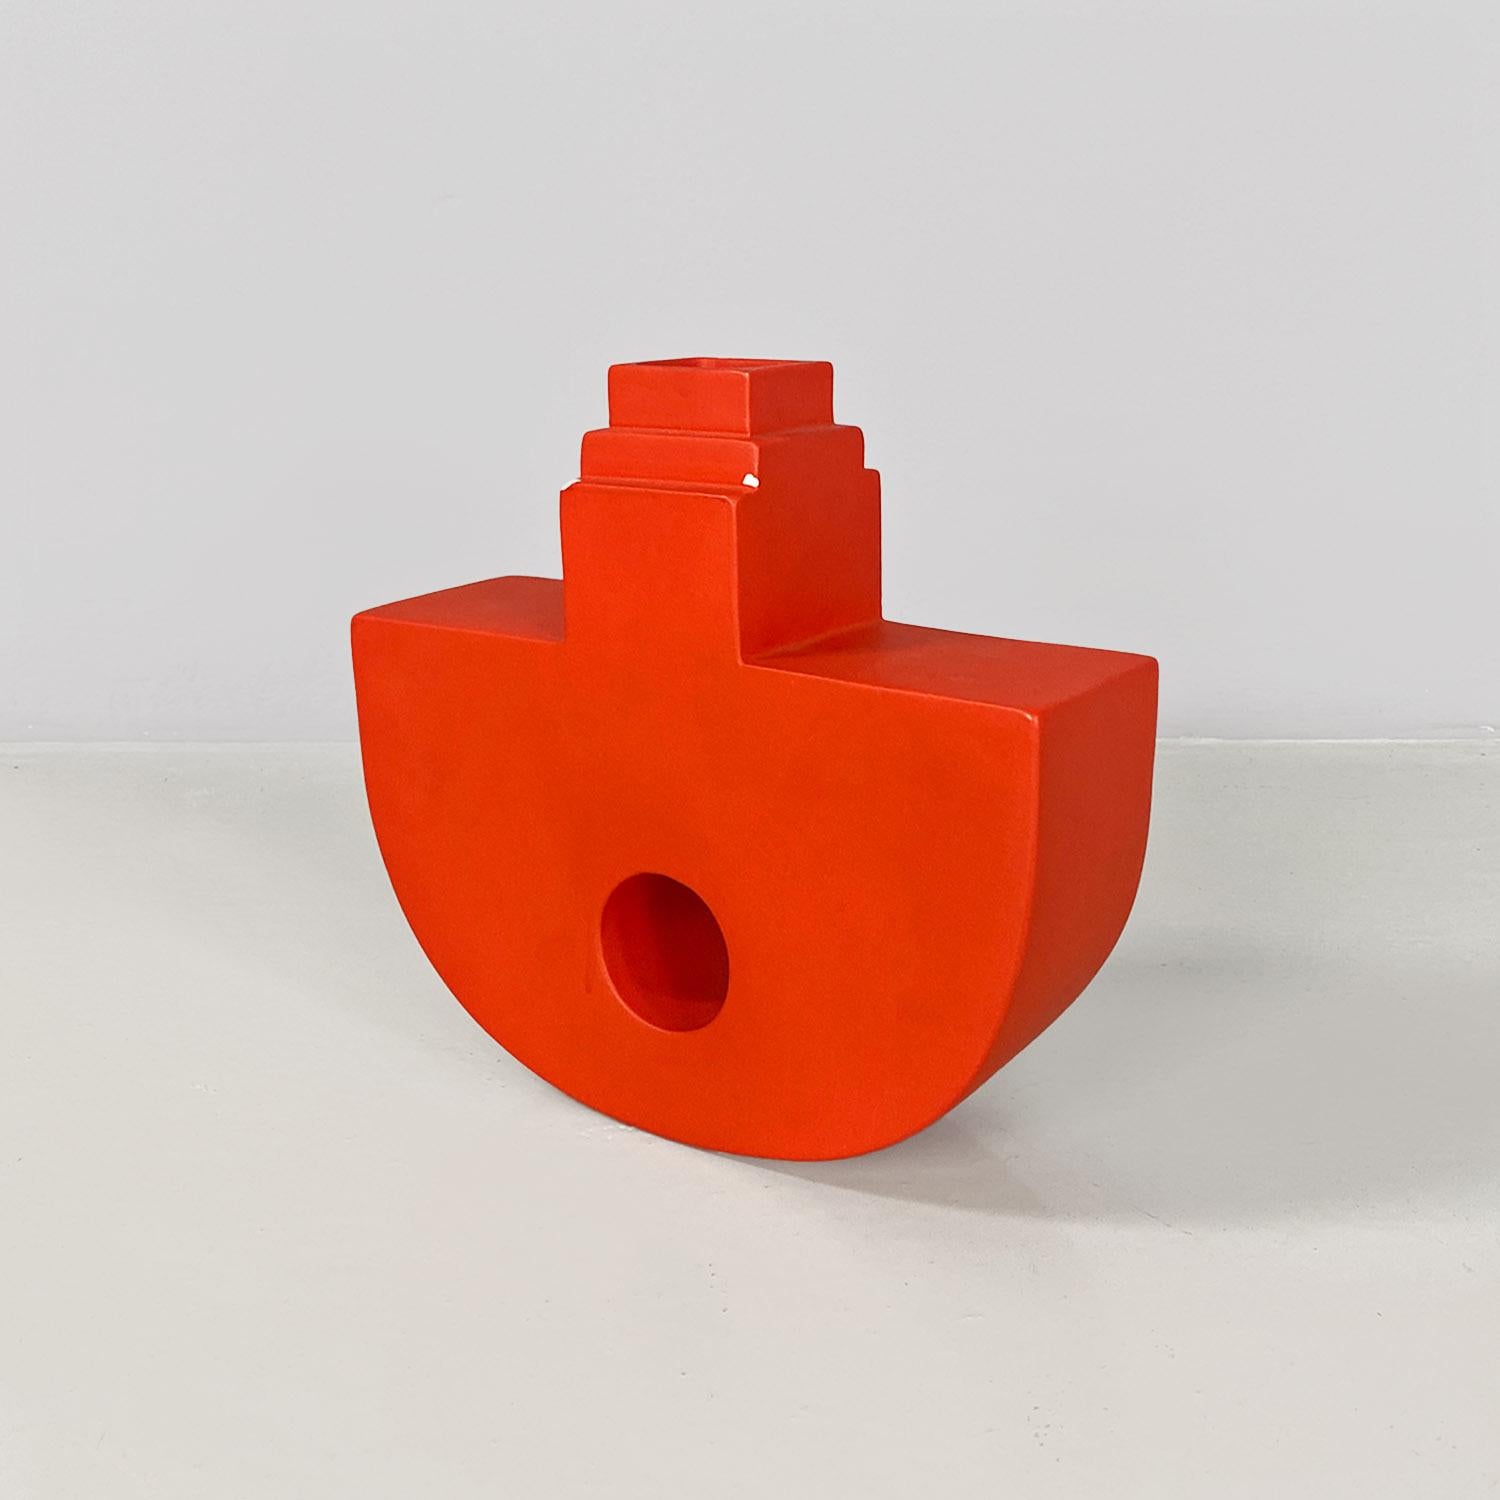 Sculpture entitled Dondolo, in bright orange red painted ceramic with a matt finish. The subject of the sculpture is geometric and rounded at the base. The sculpture can also be used as a vase as it has a square hole in the upper part.
Produced and